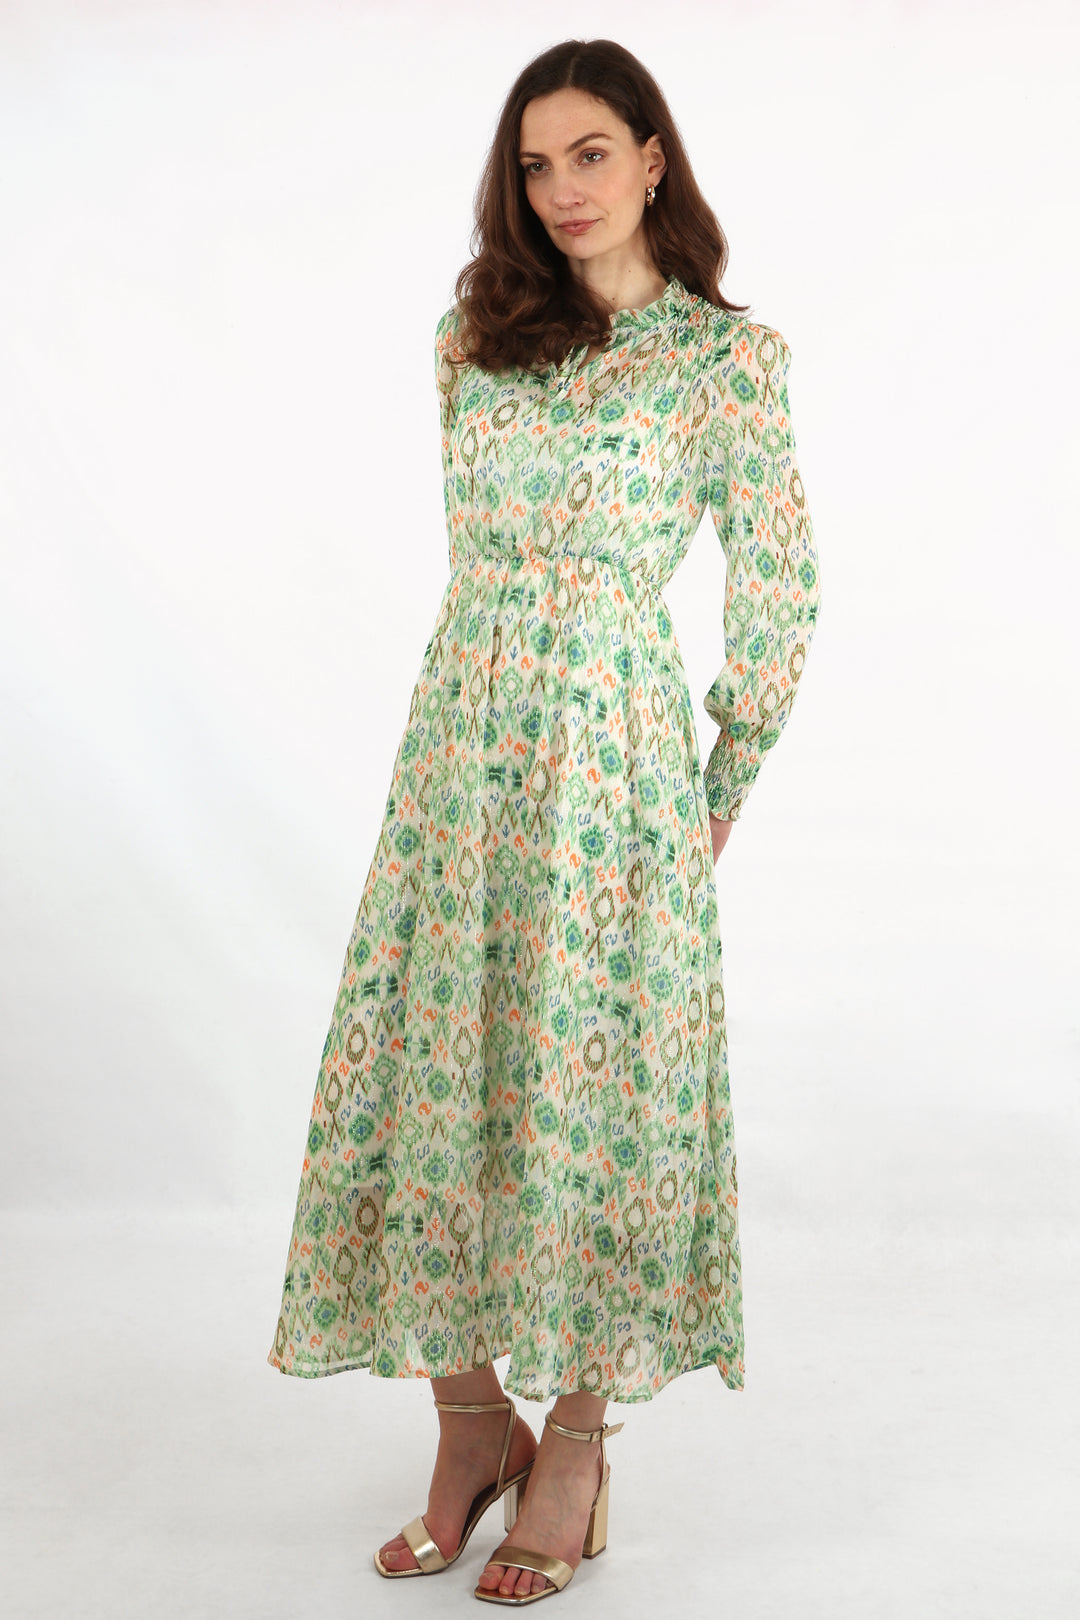 model wearing a long sleeve mdid dress with an all over green and orange ikat print pattern